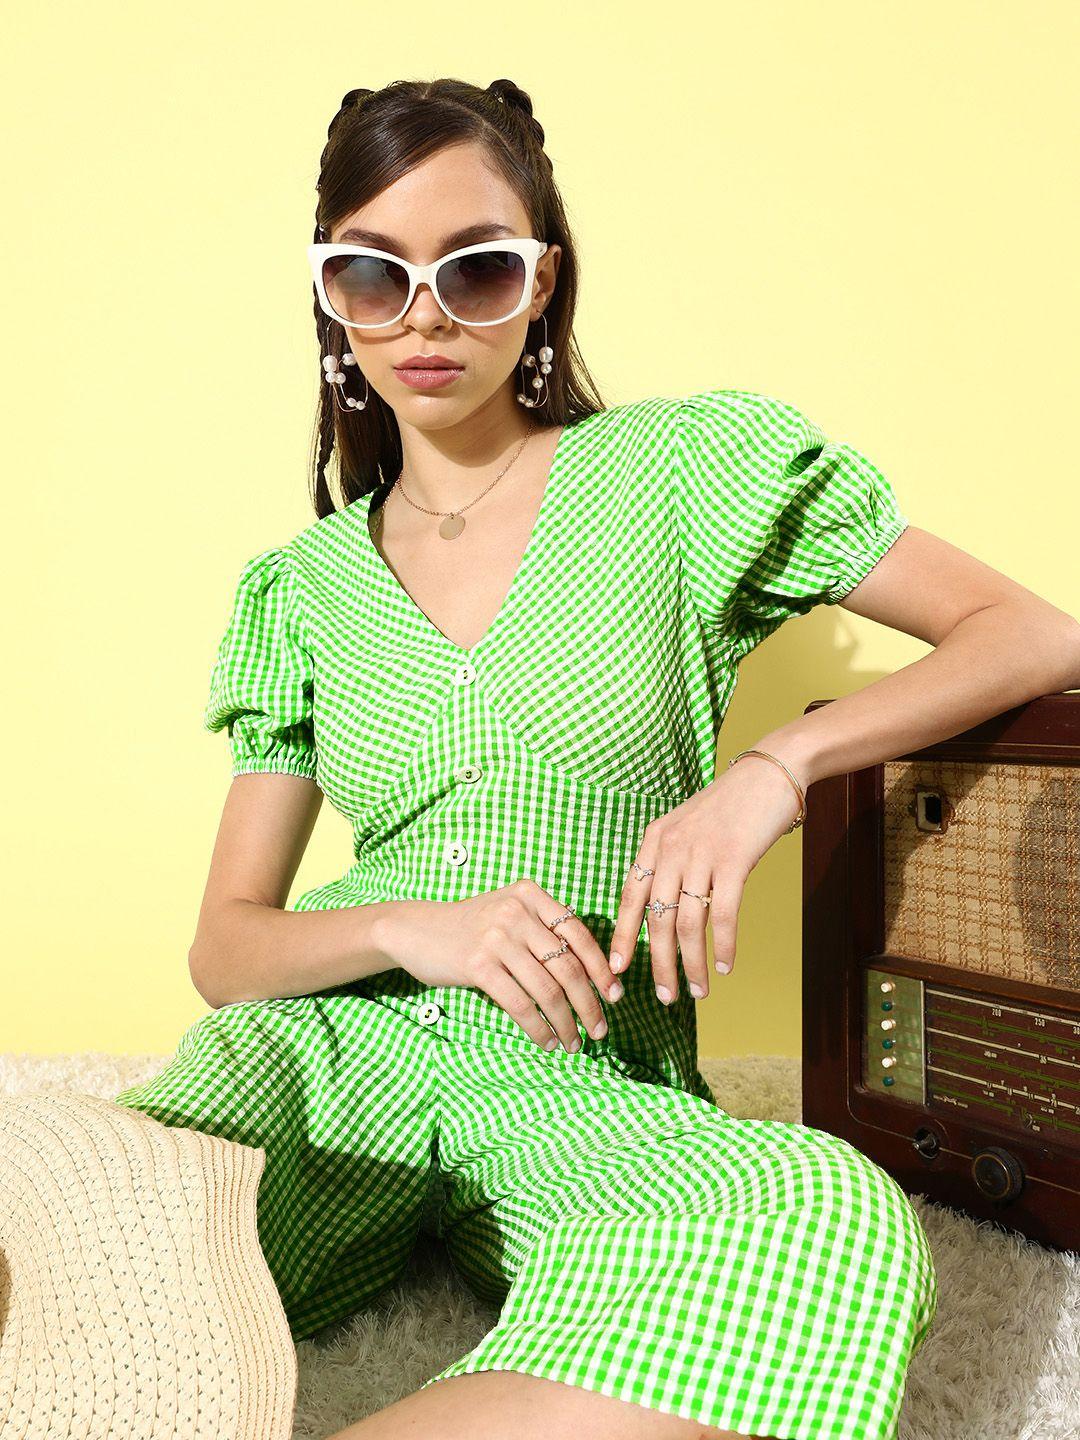 style quotient women gorgeous green checked summer gingham jumpsuit